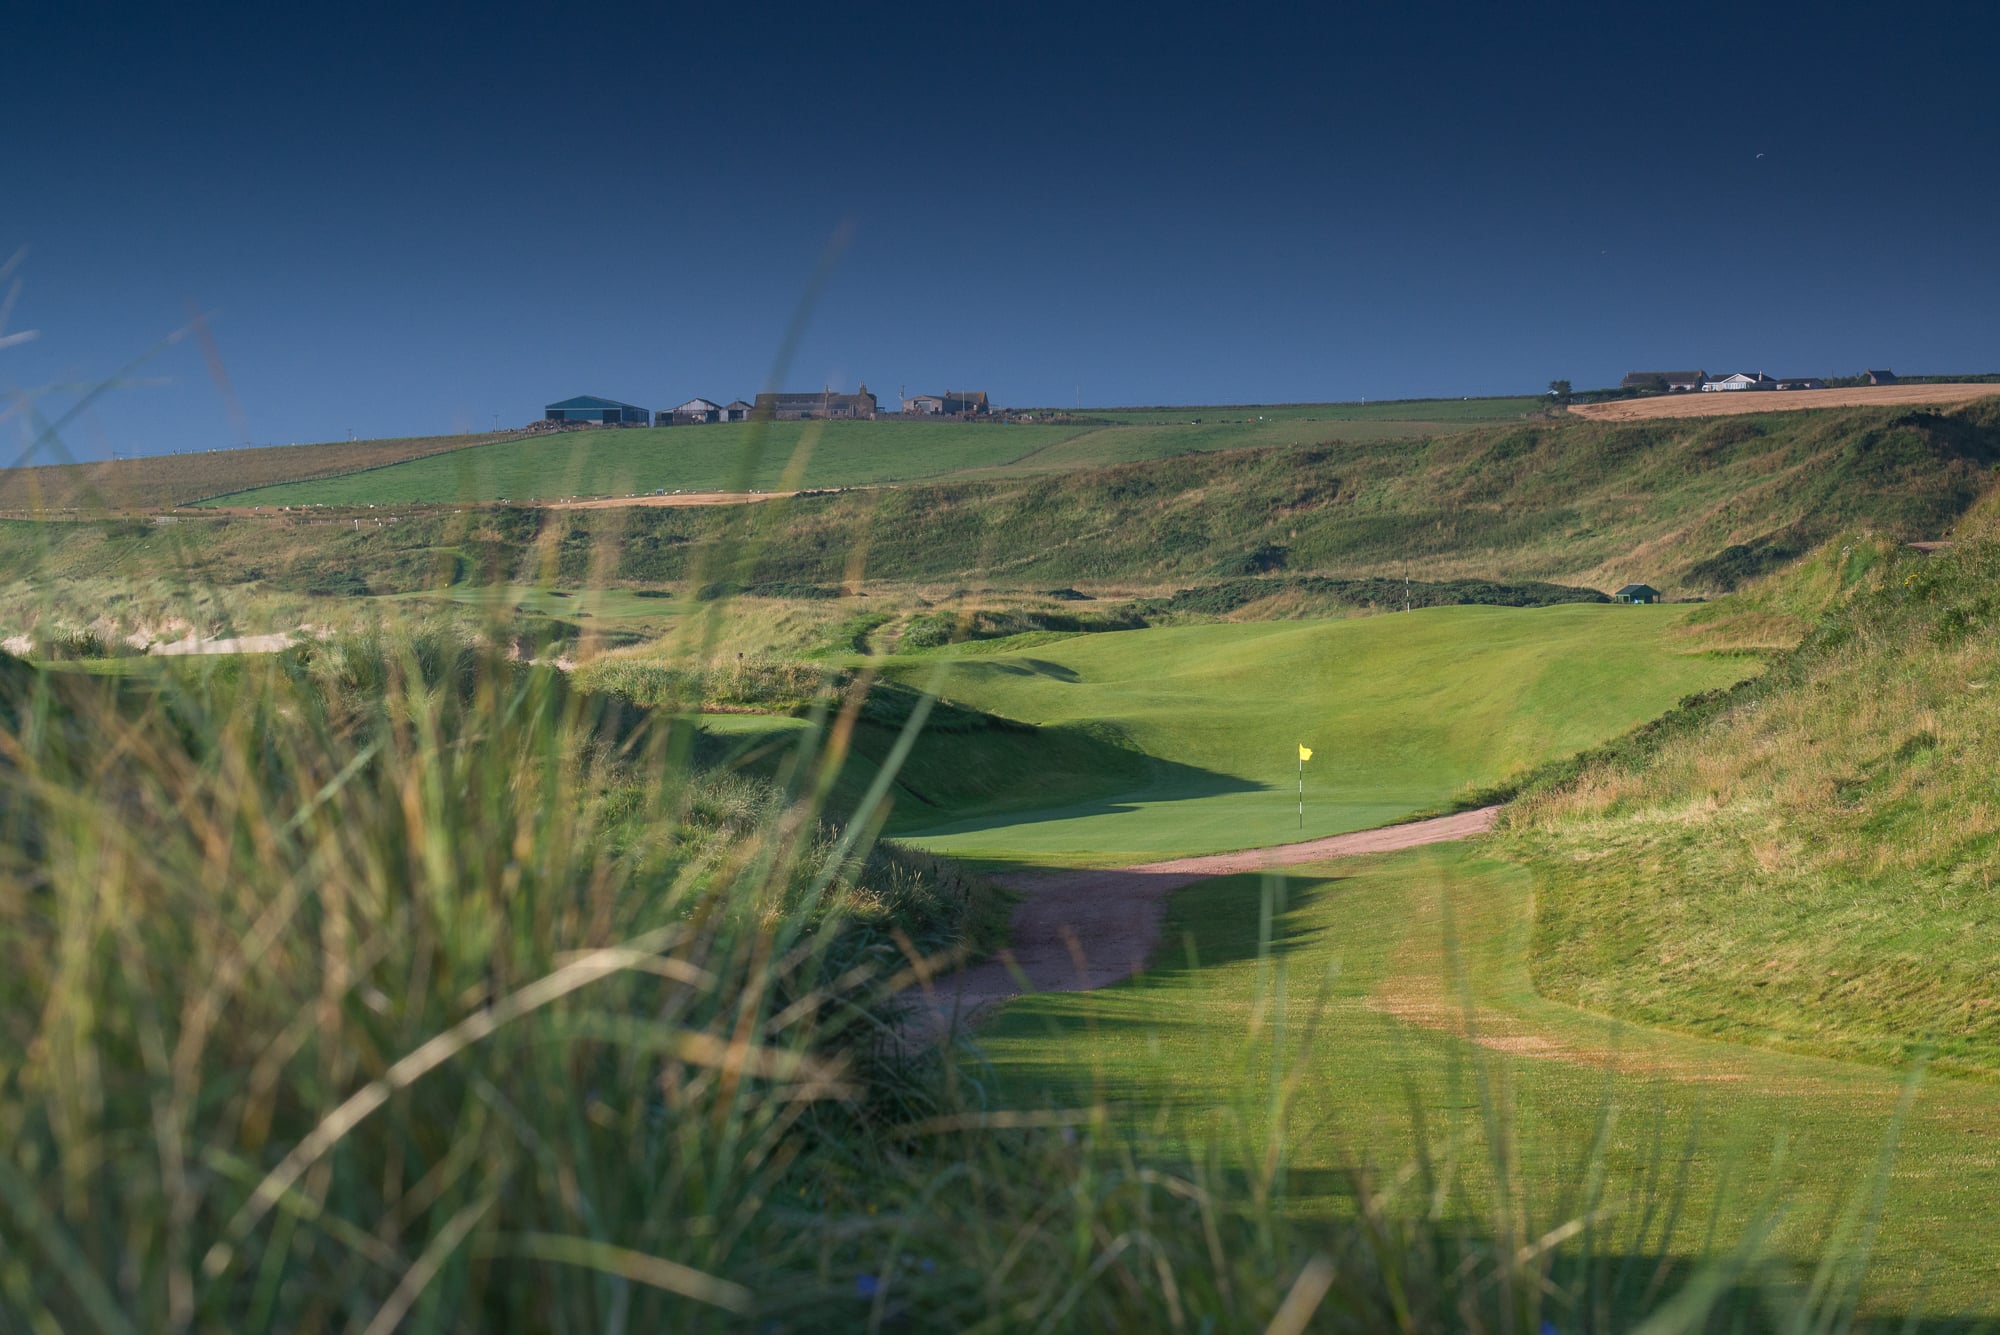 Image of the 14th green and fairway on the Championship Links Golf Course, Cruden Bay, Aberdeenshire, Scotland